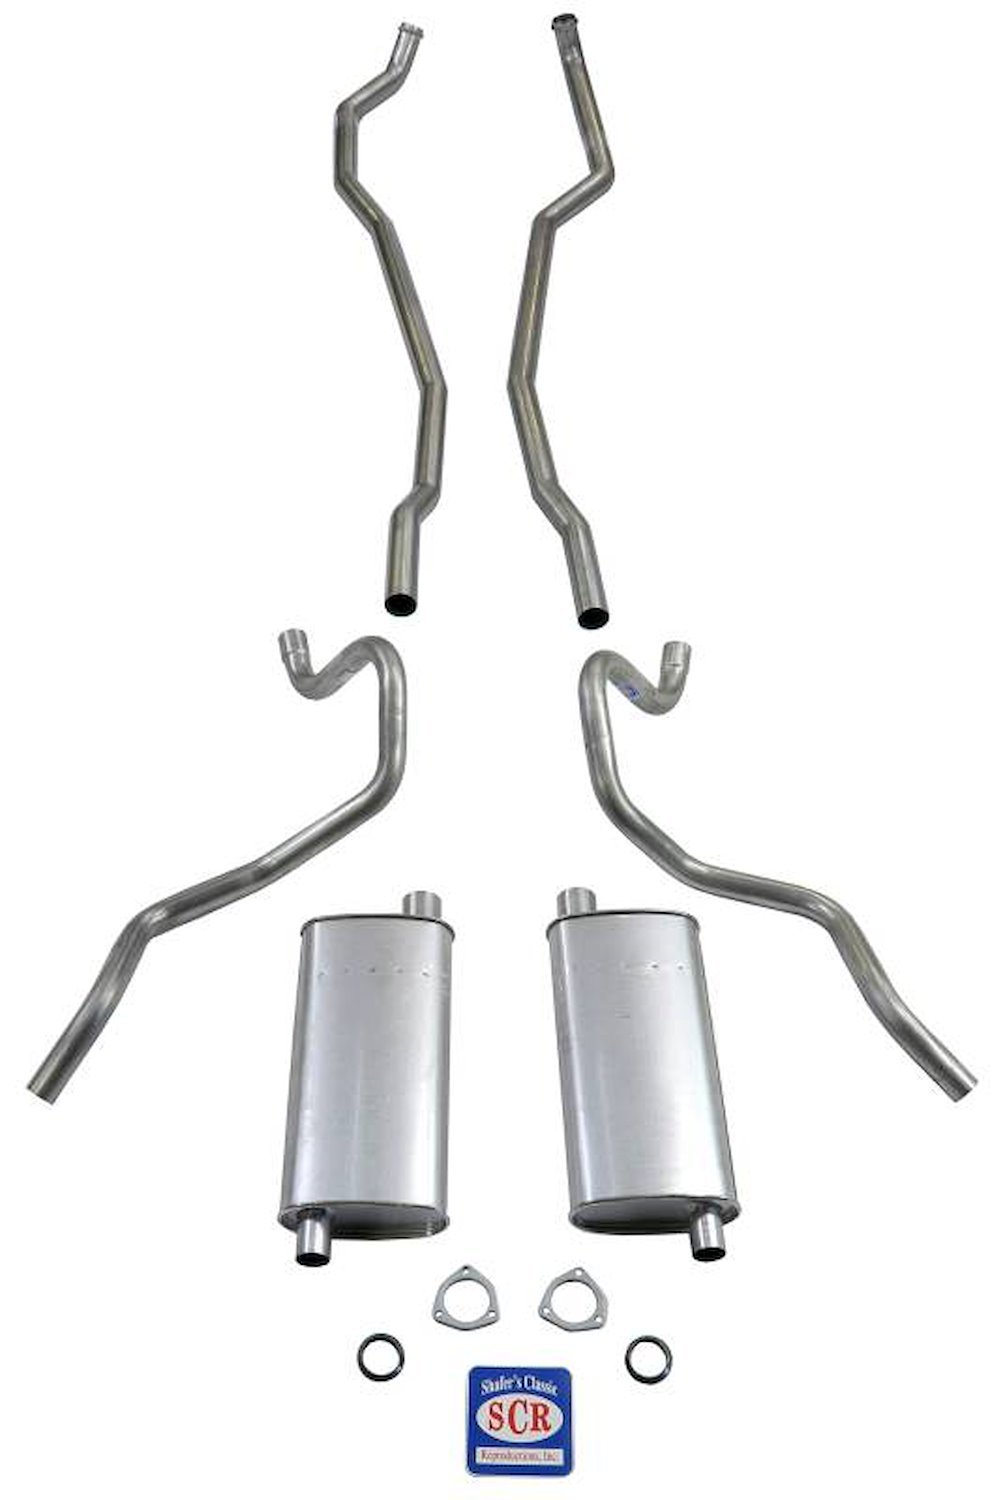 73065 1965-66 Chevrolet Exhaust System 8-cyl 396 & 427 Dual Exhaust w/ 2-1/2 in. Exhaust Pipes